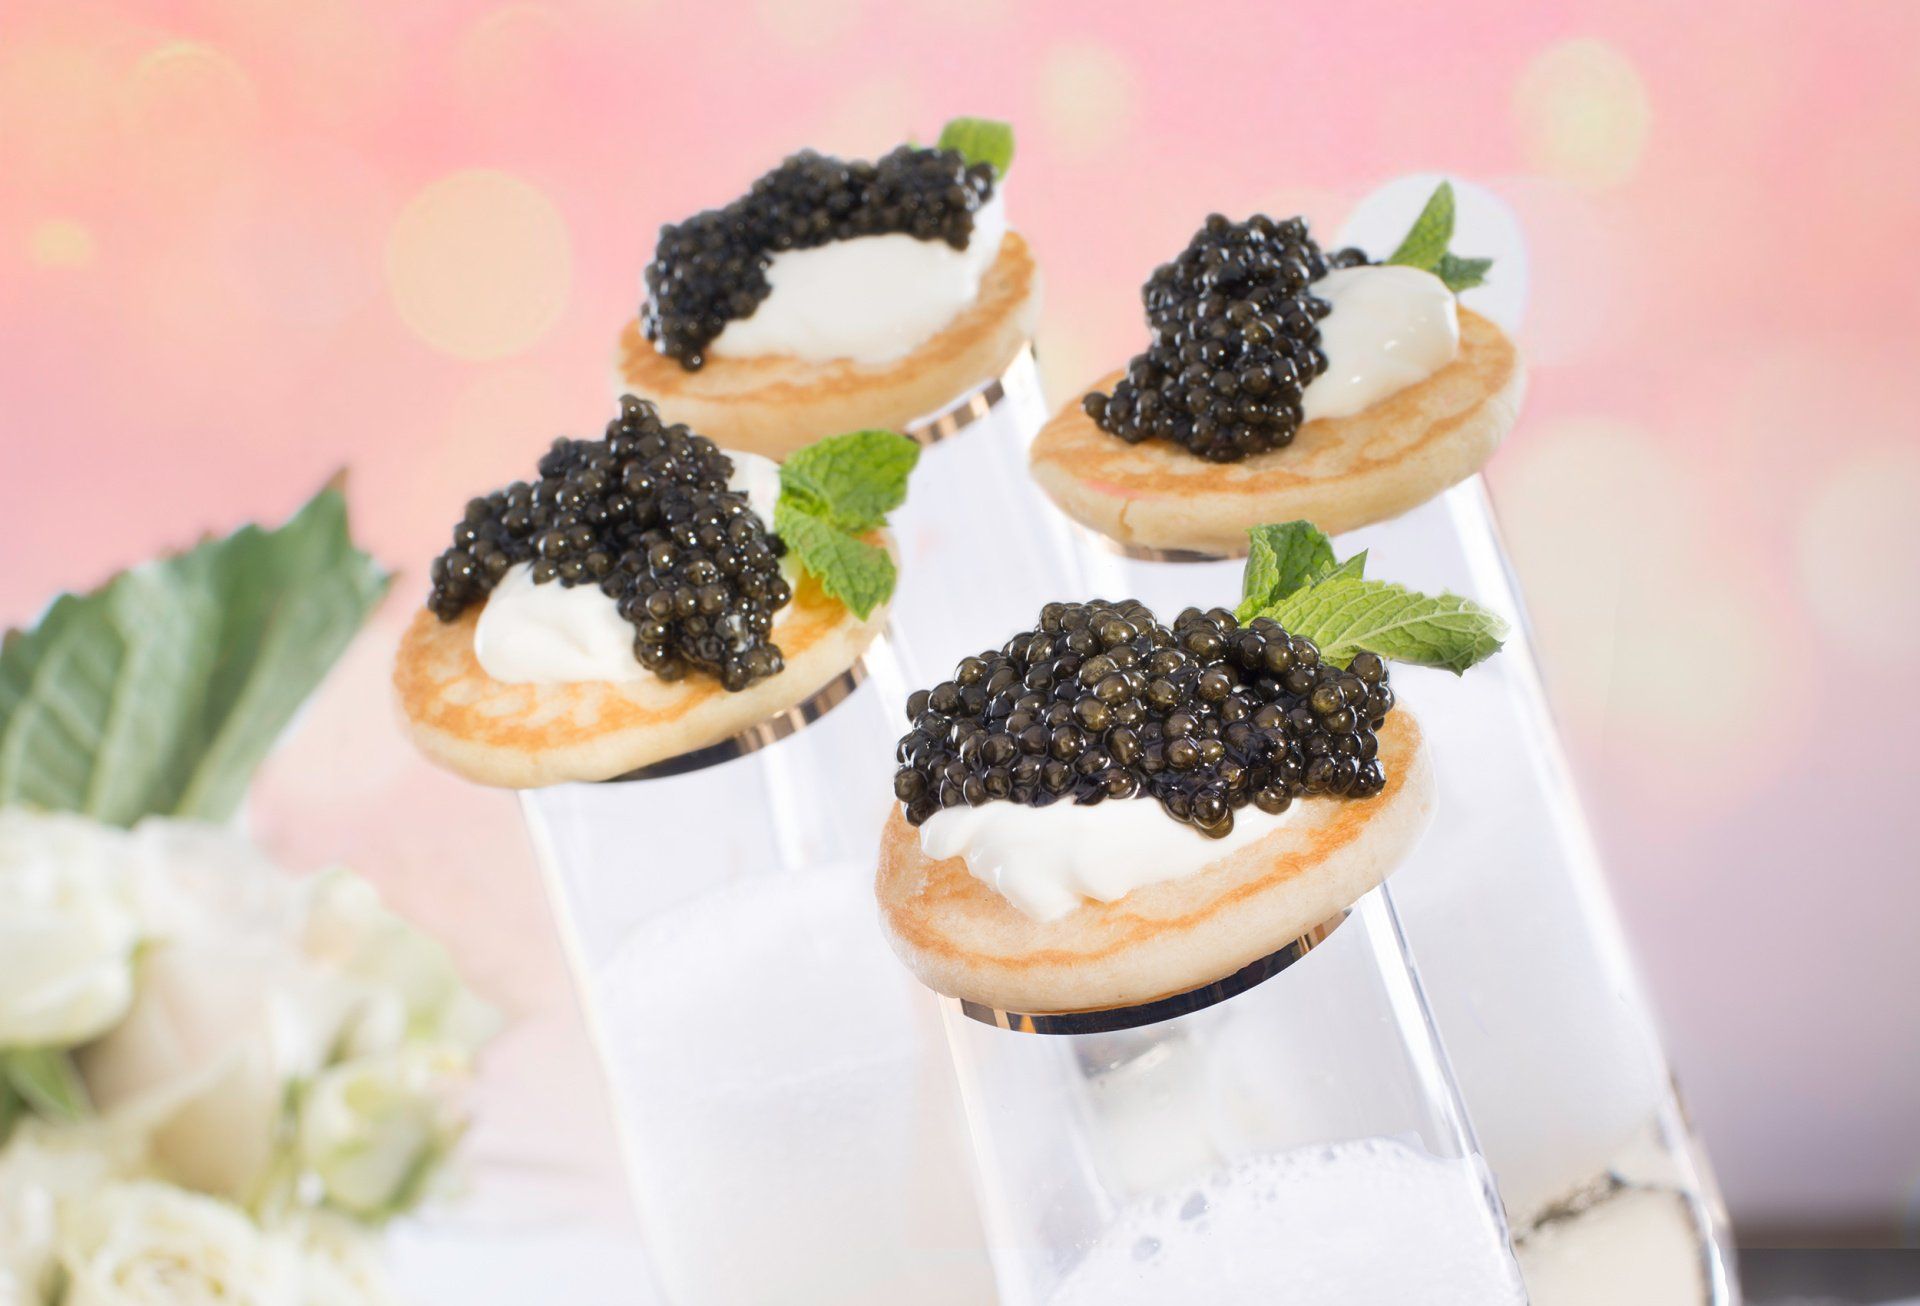 Caviar topped champagne flutes